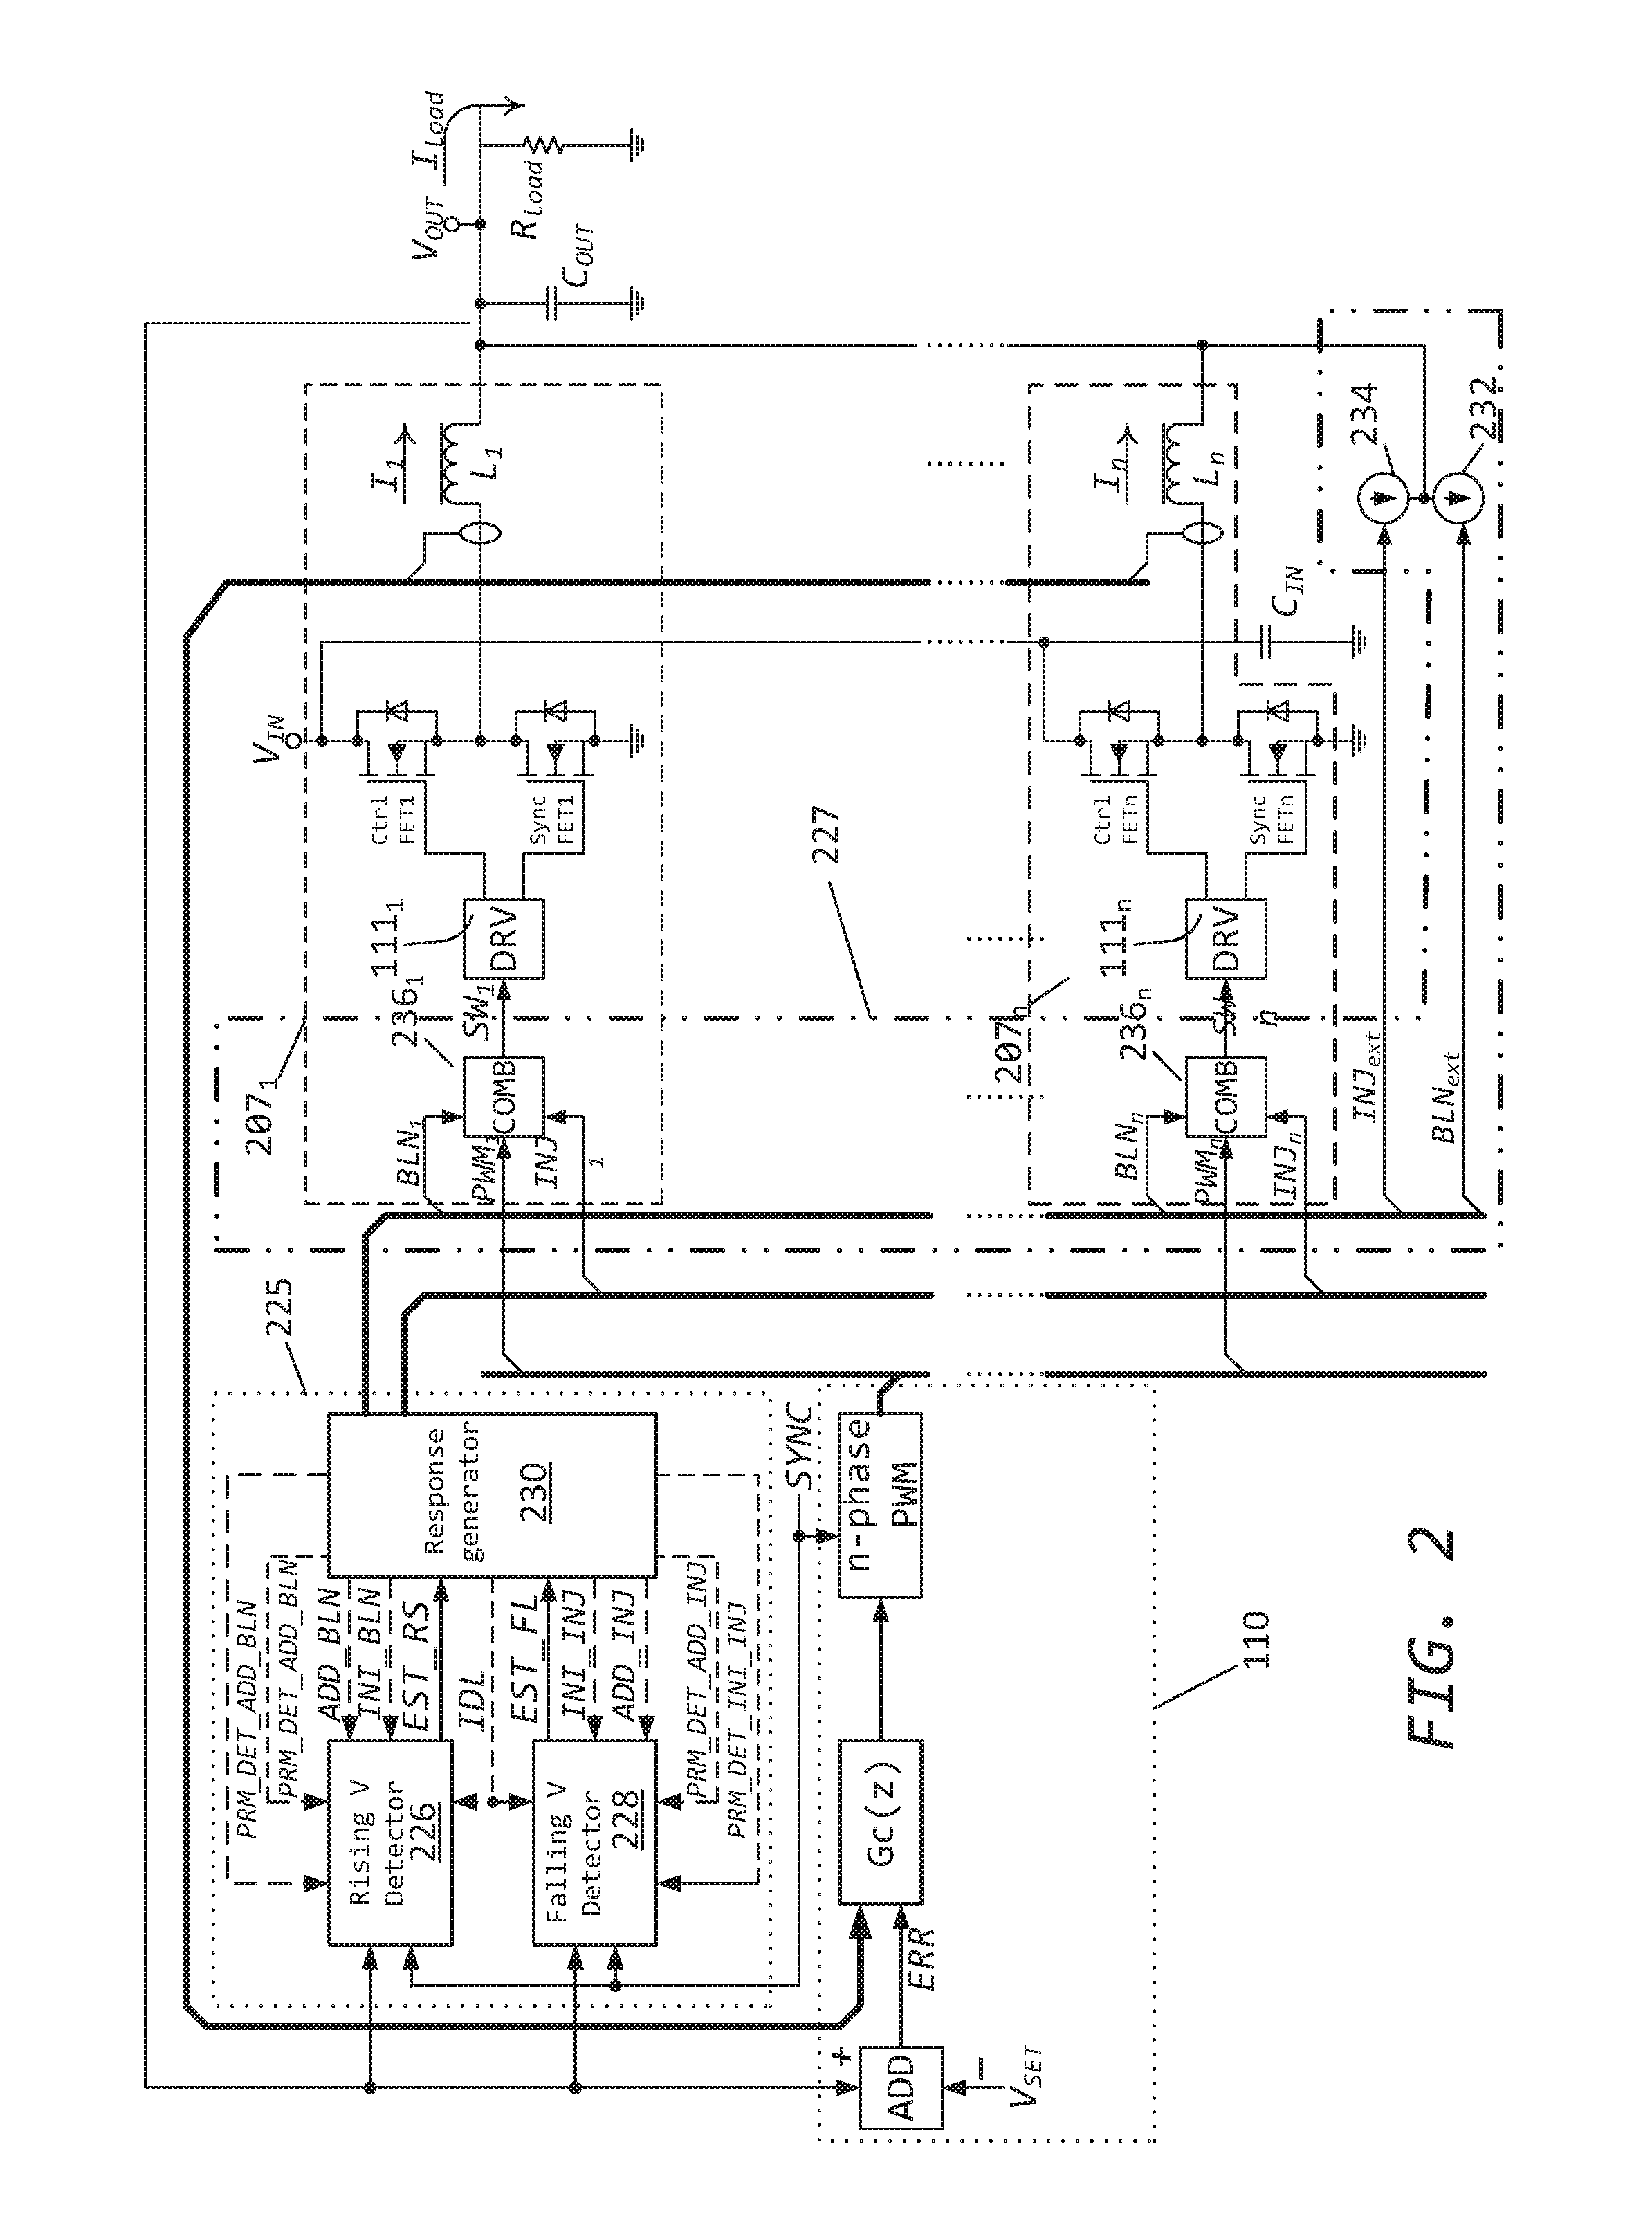 Method for controlling a DC-to-DC converter